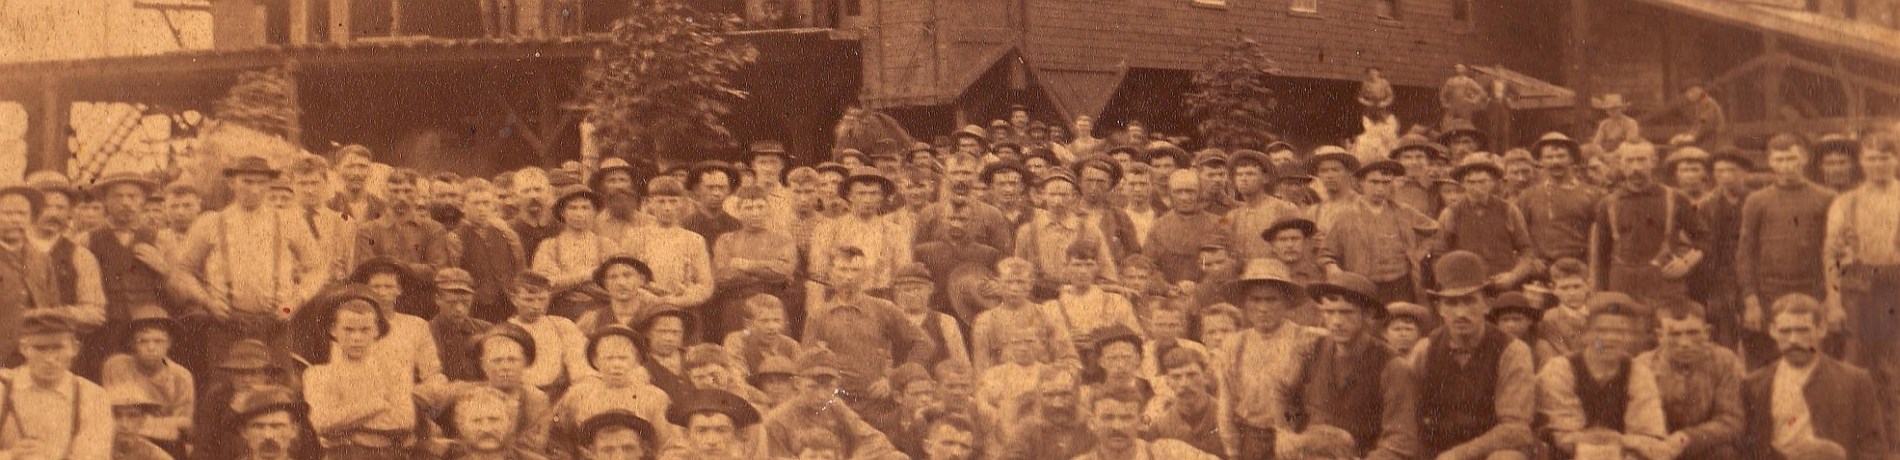 Group of people in front of a sawmill.